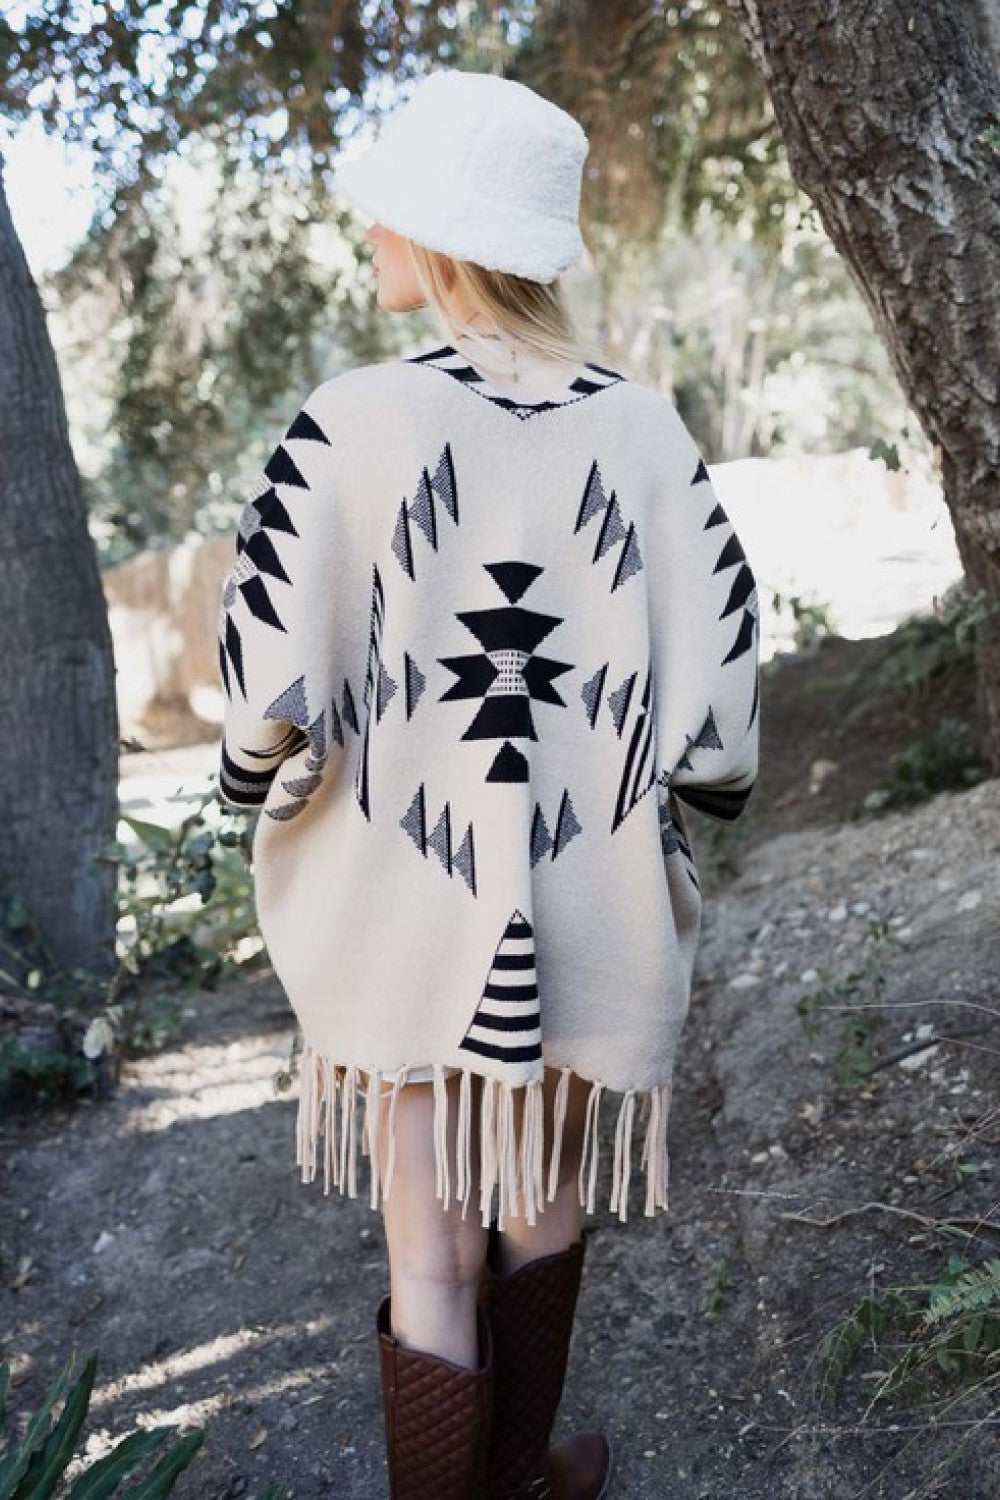 Leto Accessories Cable Knit Poncho with Tassels